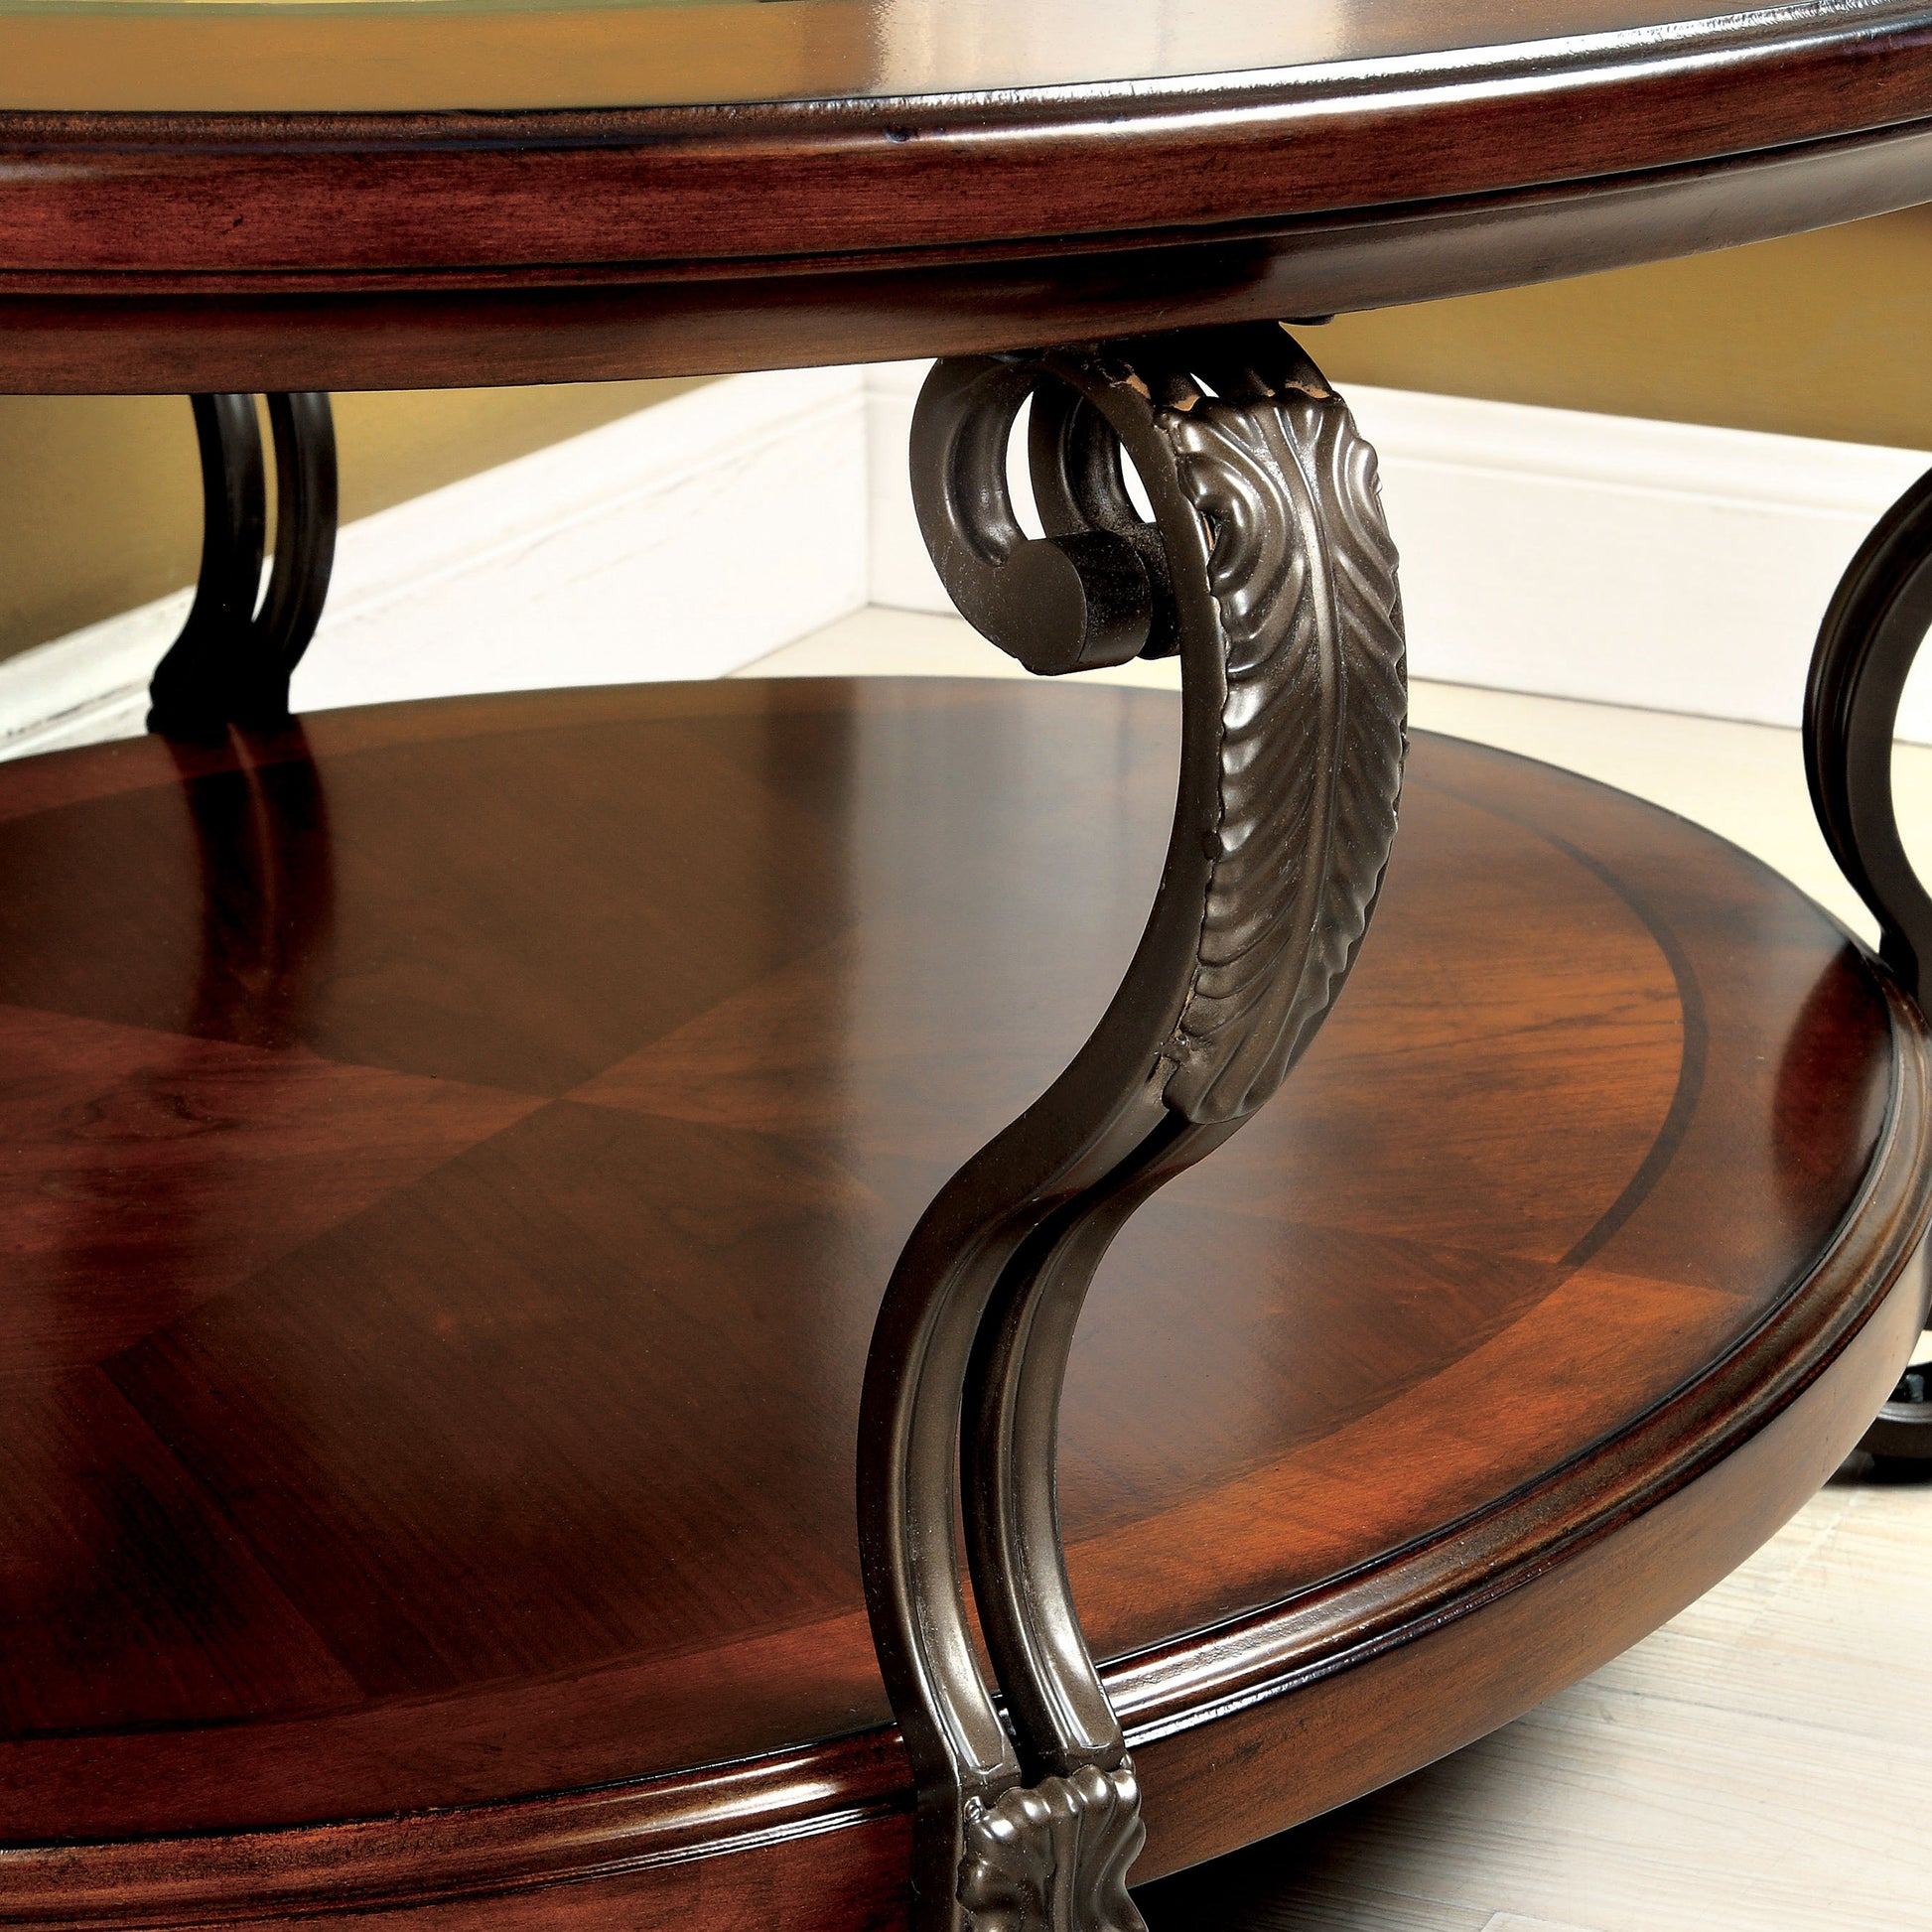 Angled close-up decorative scroll leg view of a traditional brown cherry and glass oval coffee table in a living area